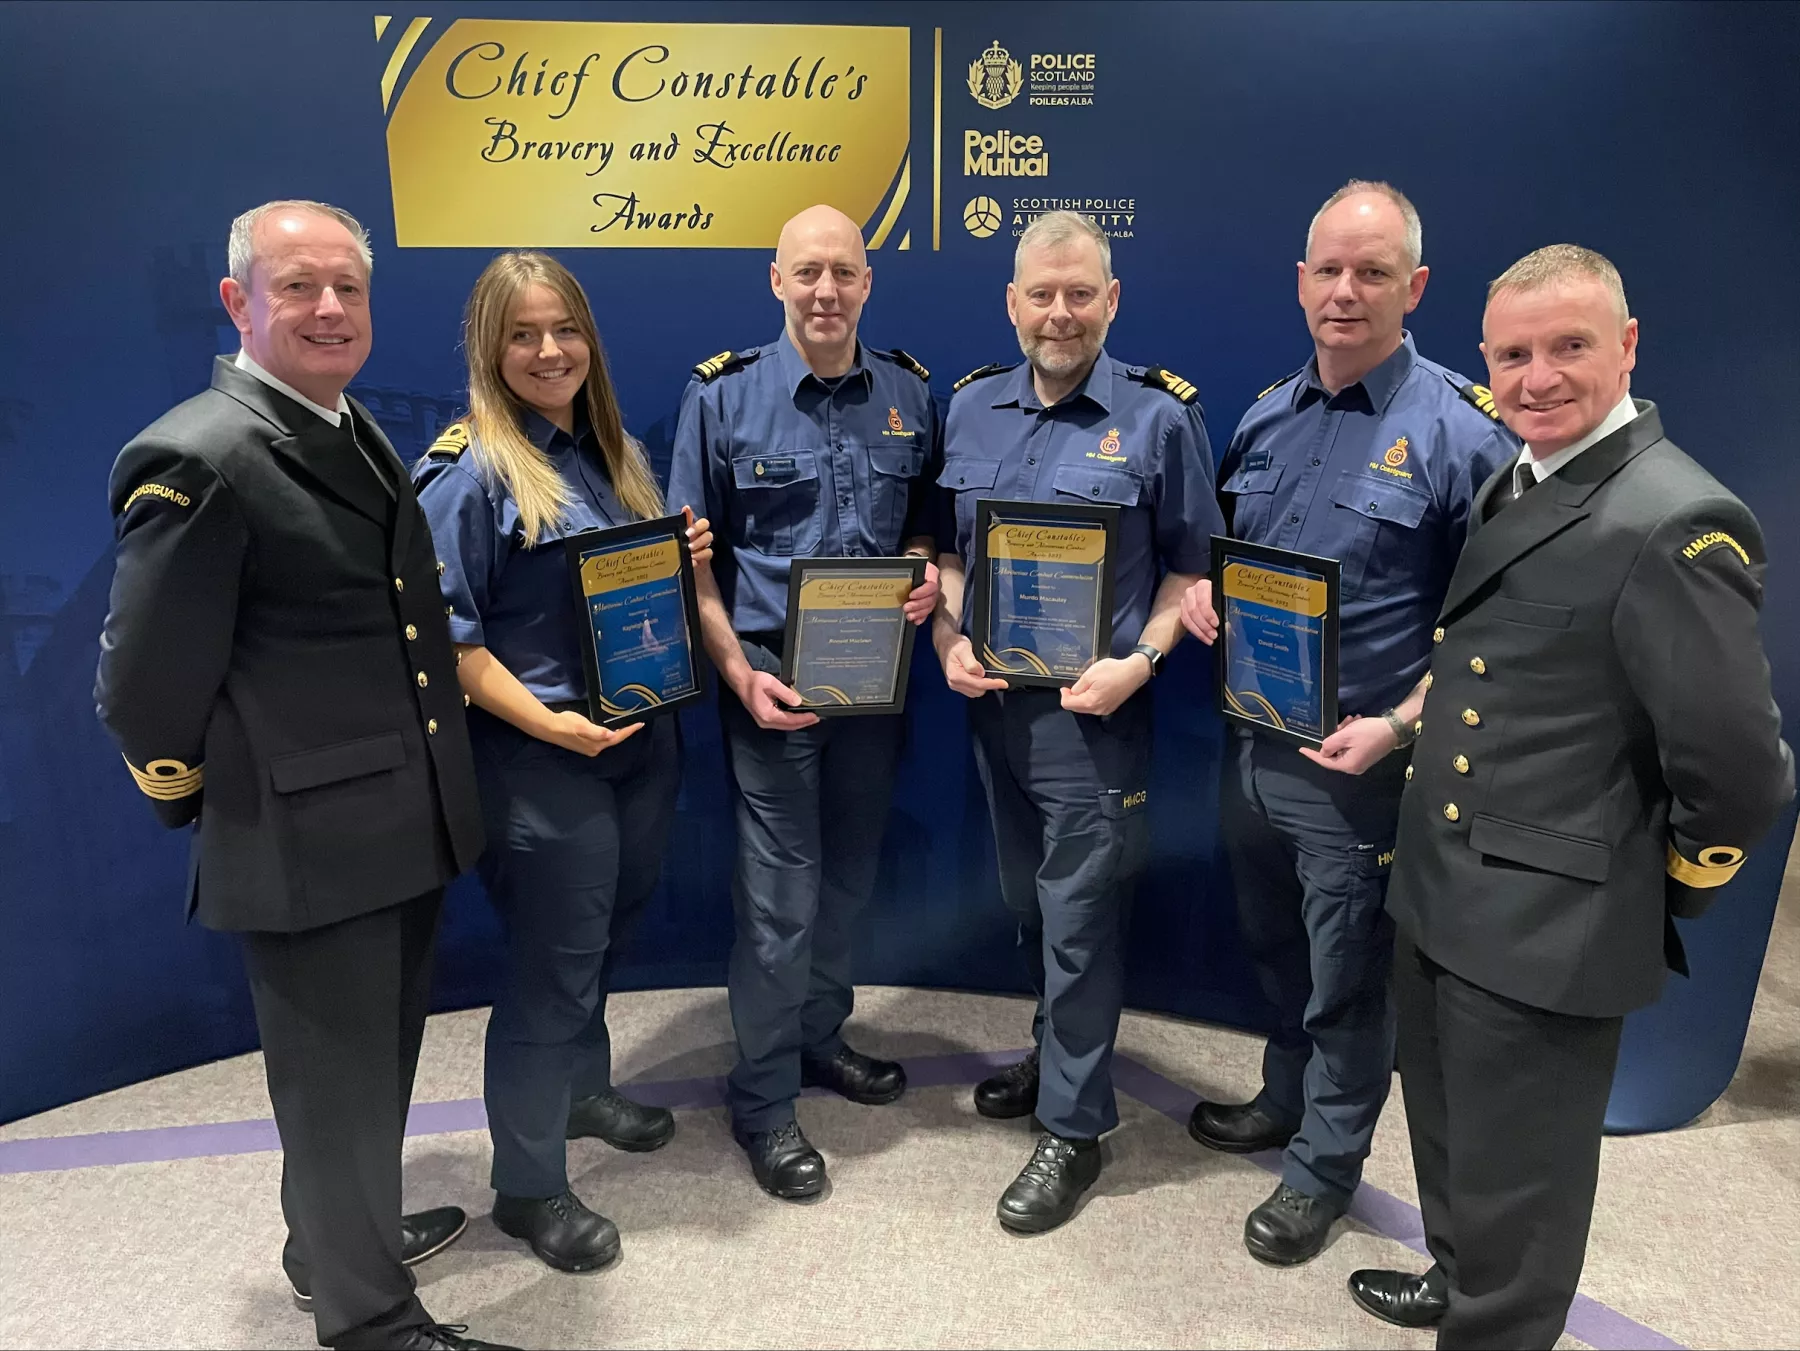 Members of HM Coastguard smiling and holding Bravery and Conduct awards from Police Scotland